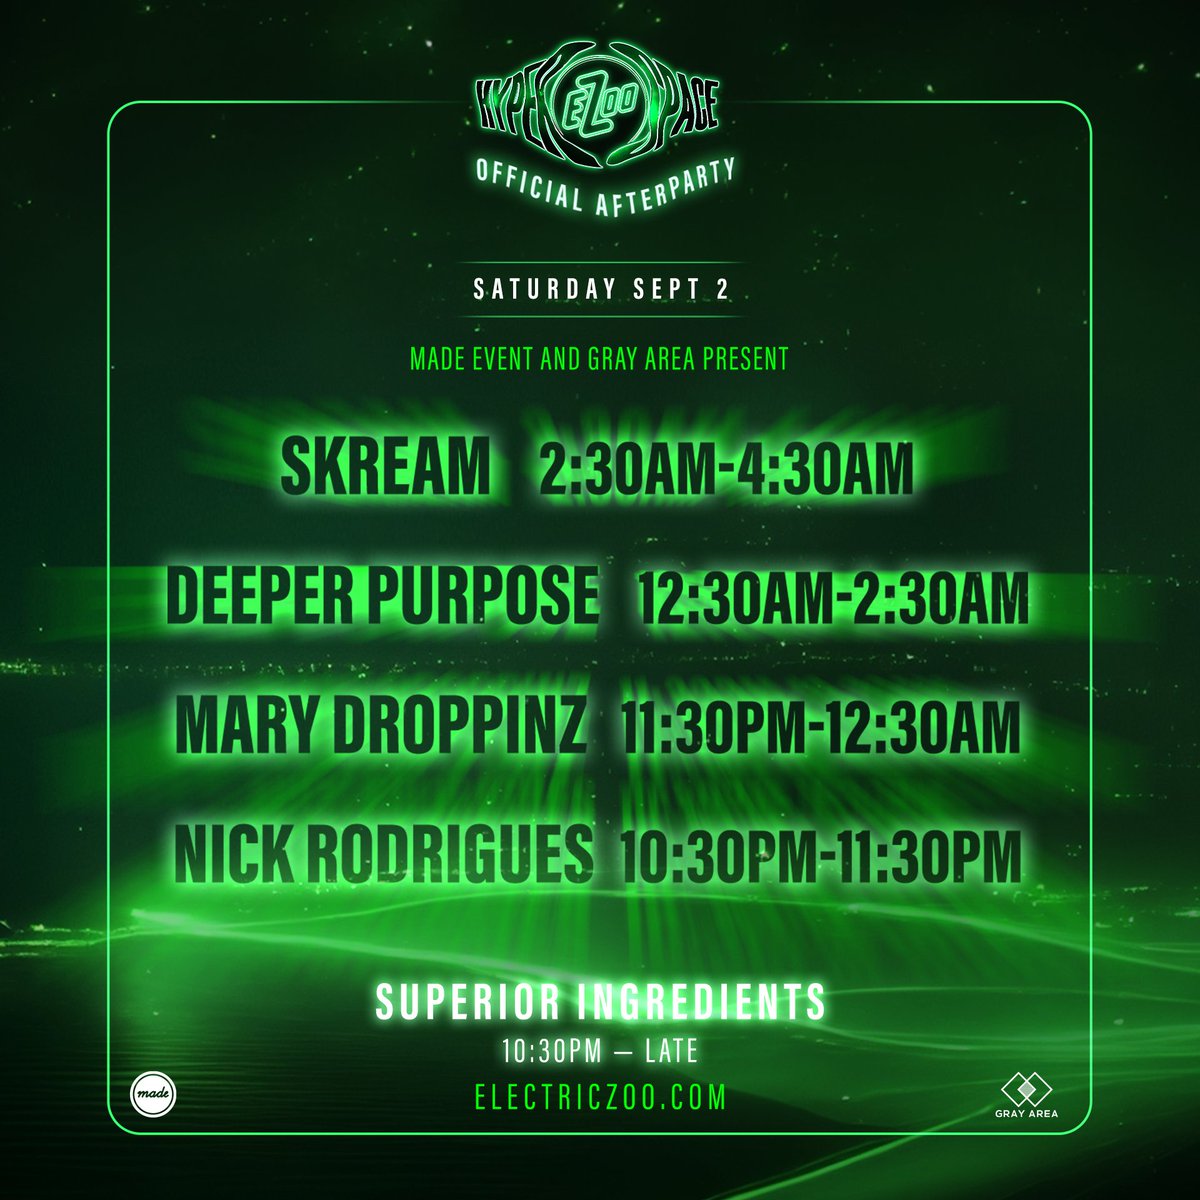 Tonight, @I_Skream x @DeeperPurpose92 takes place at Superior Ingredients with @MaryDroppinz & Nick Rodrigues 🔥 Doors open at 10:30pm. Get your afterparty ticket now → dice.fm/event/l55dx